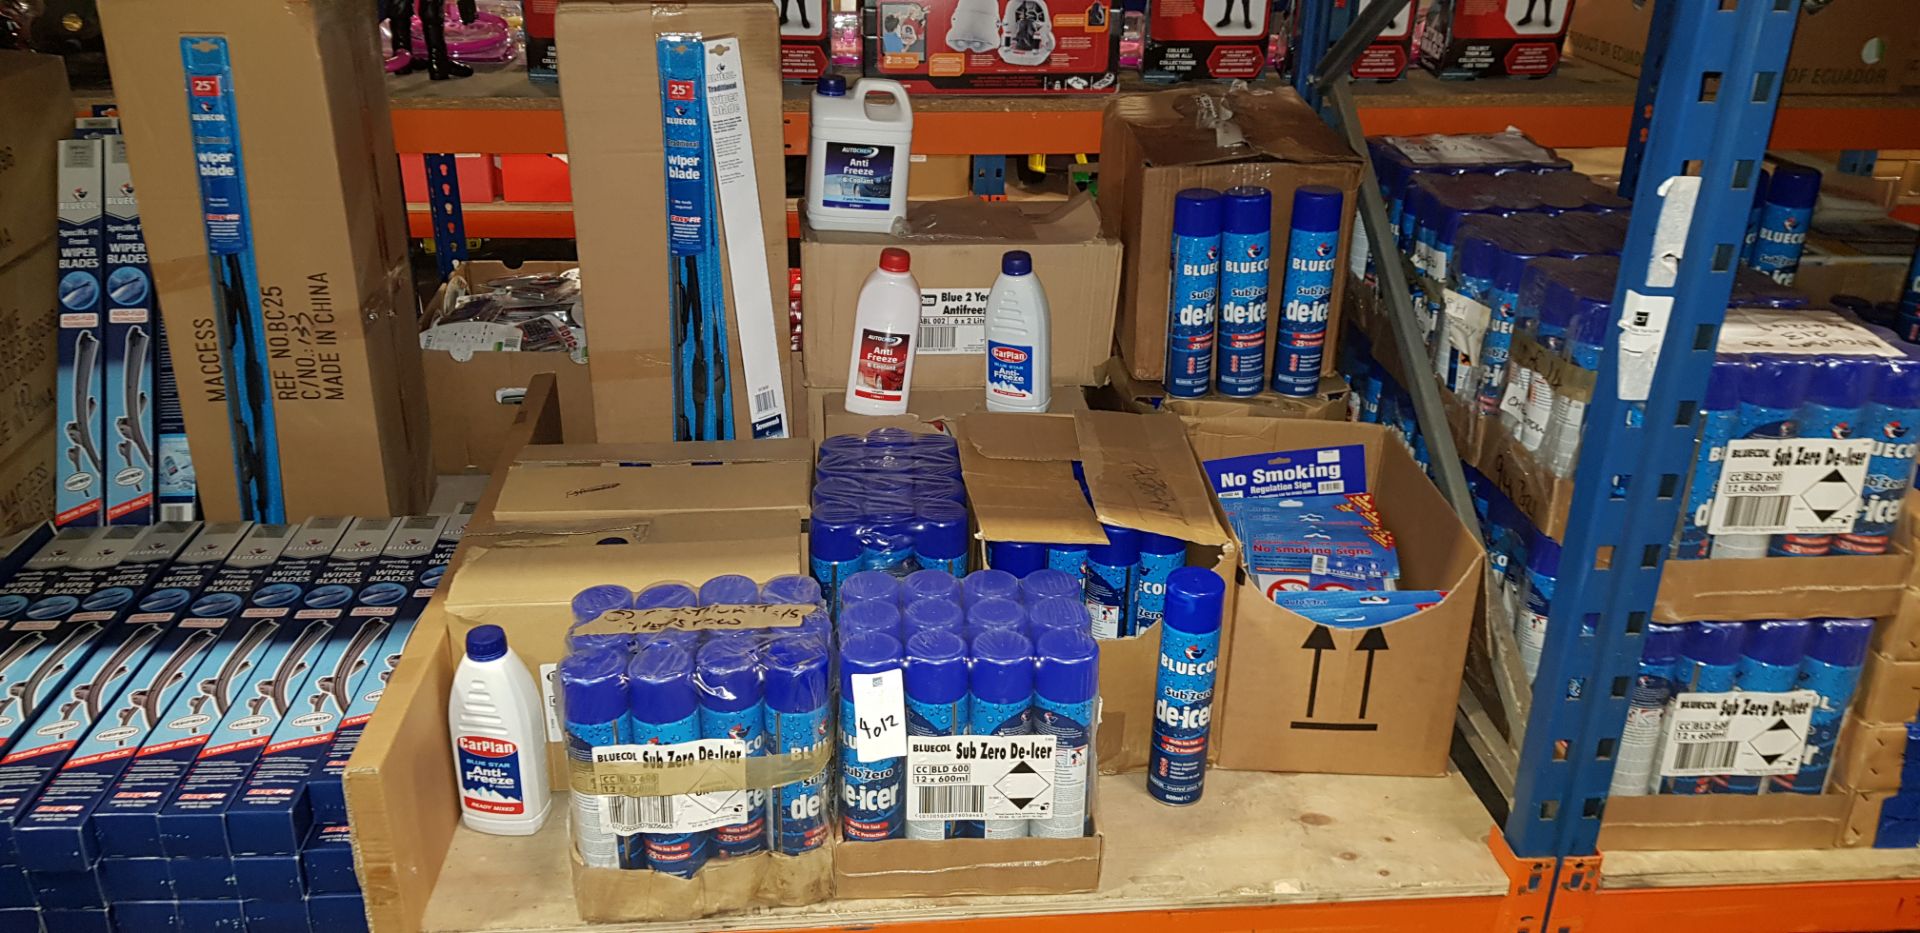 APPROX 200 X MIXED AUTOMOBILE ACESSORIE'S TO INCLUDE - (BLUE COL) SUB ZERO DE-ICER, (BLUE COL)